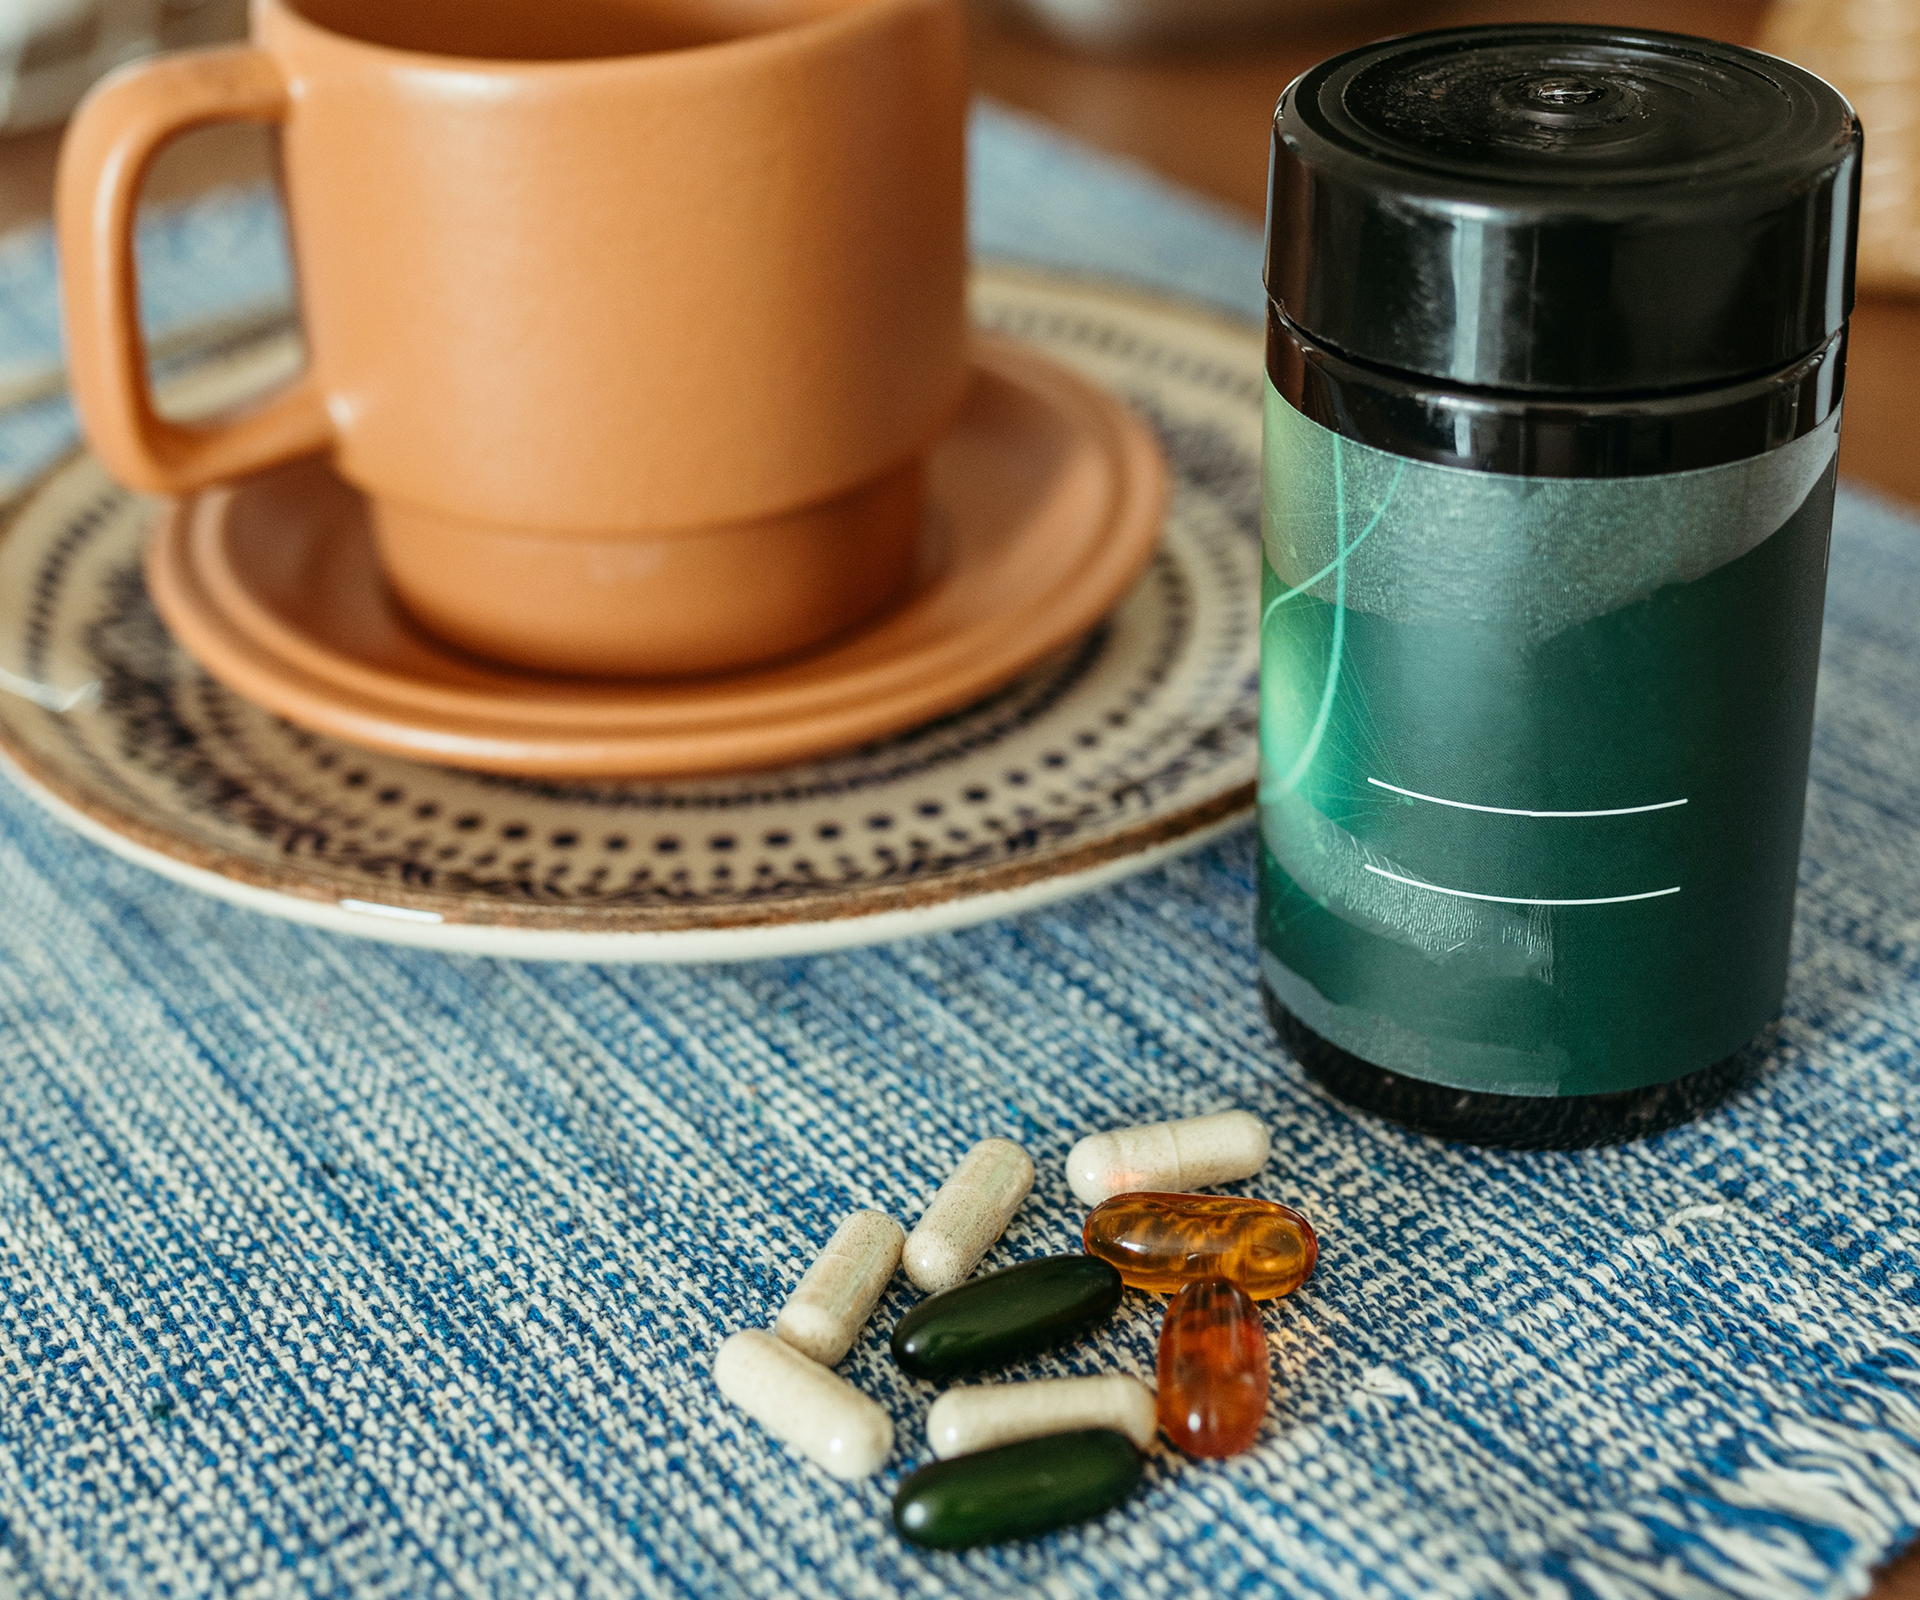 Vitamins and supplements with a coffee mug